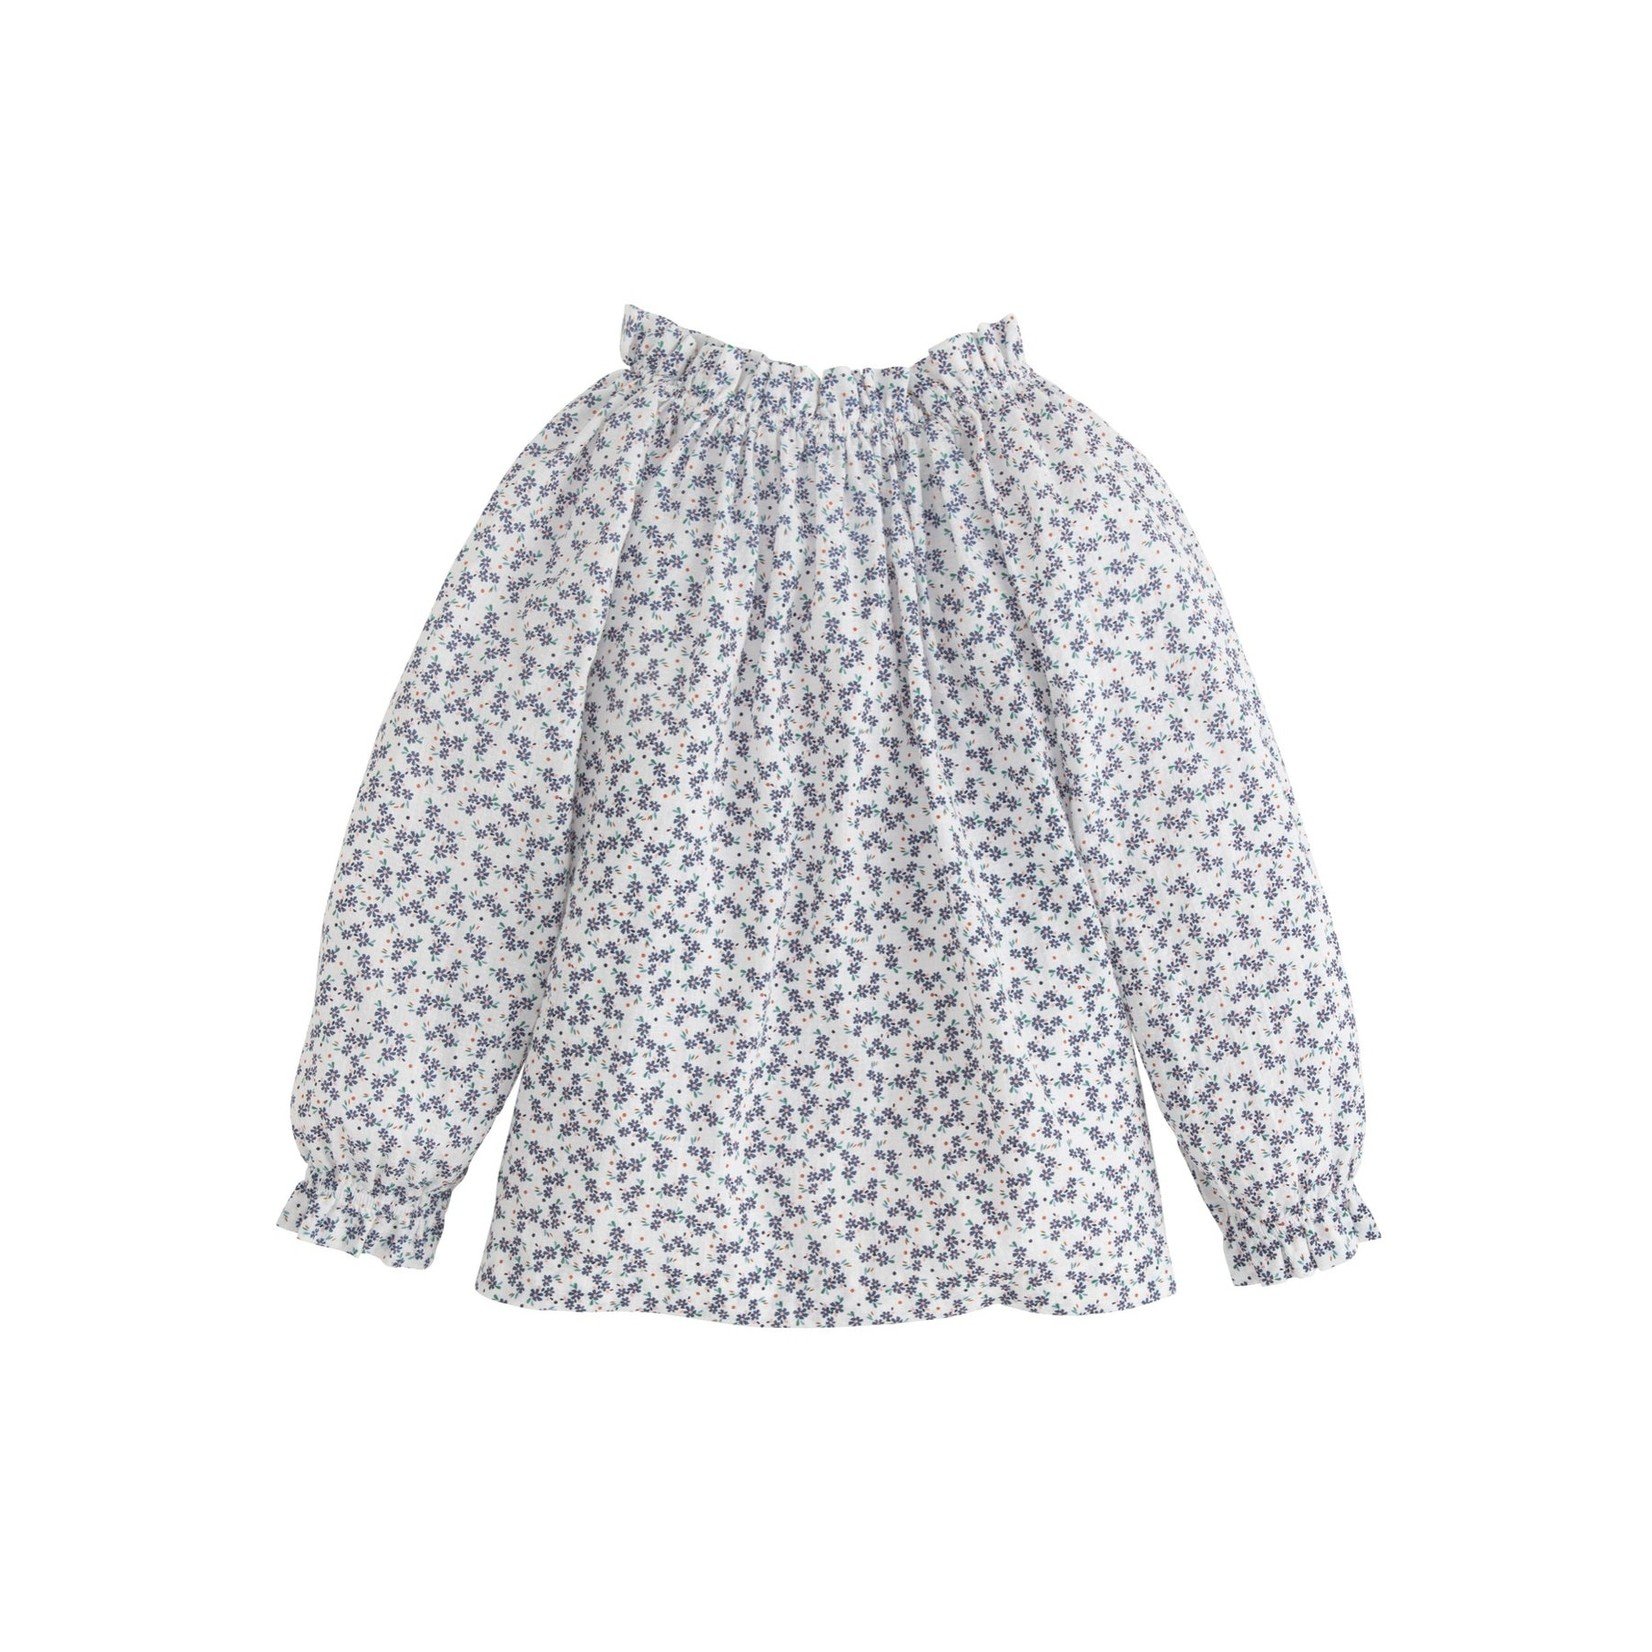 Bisby Bisby Tory Top Blueberry Floral